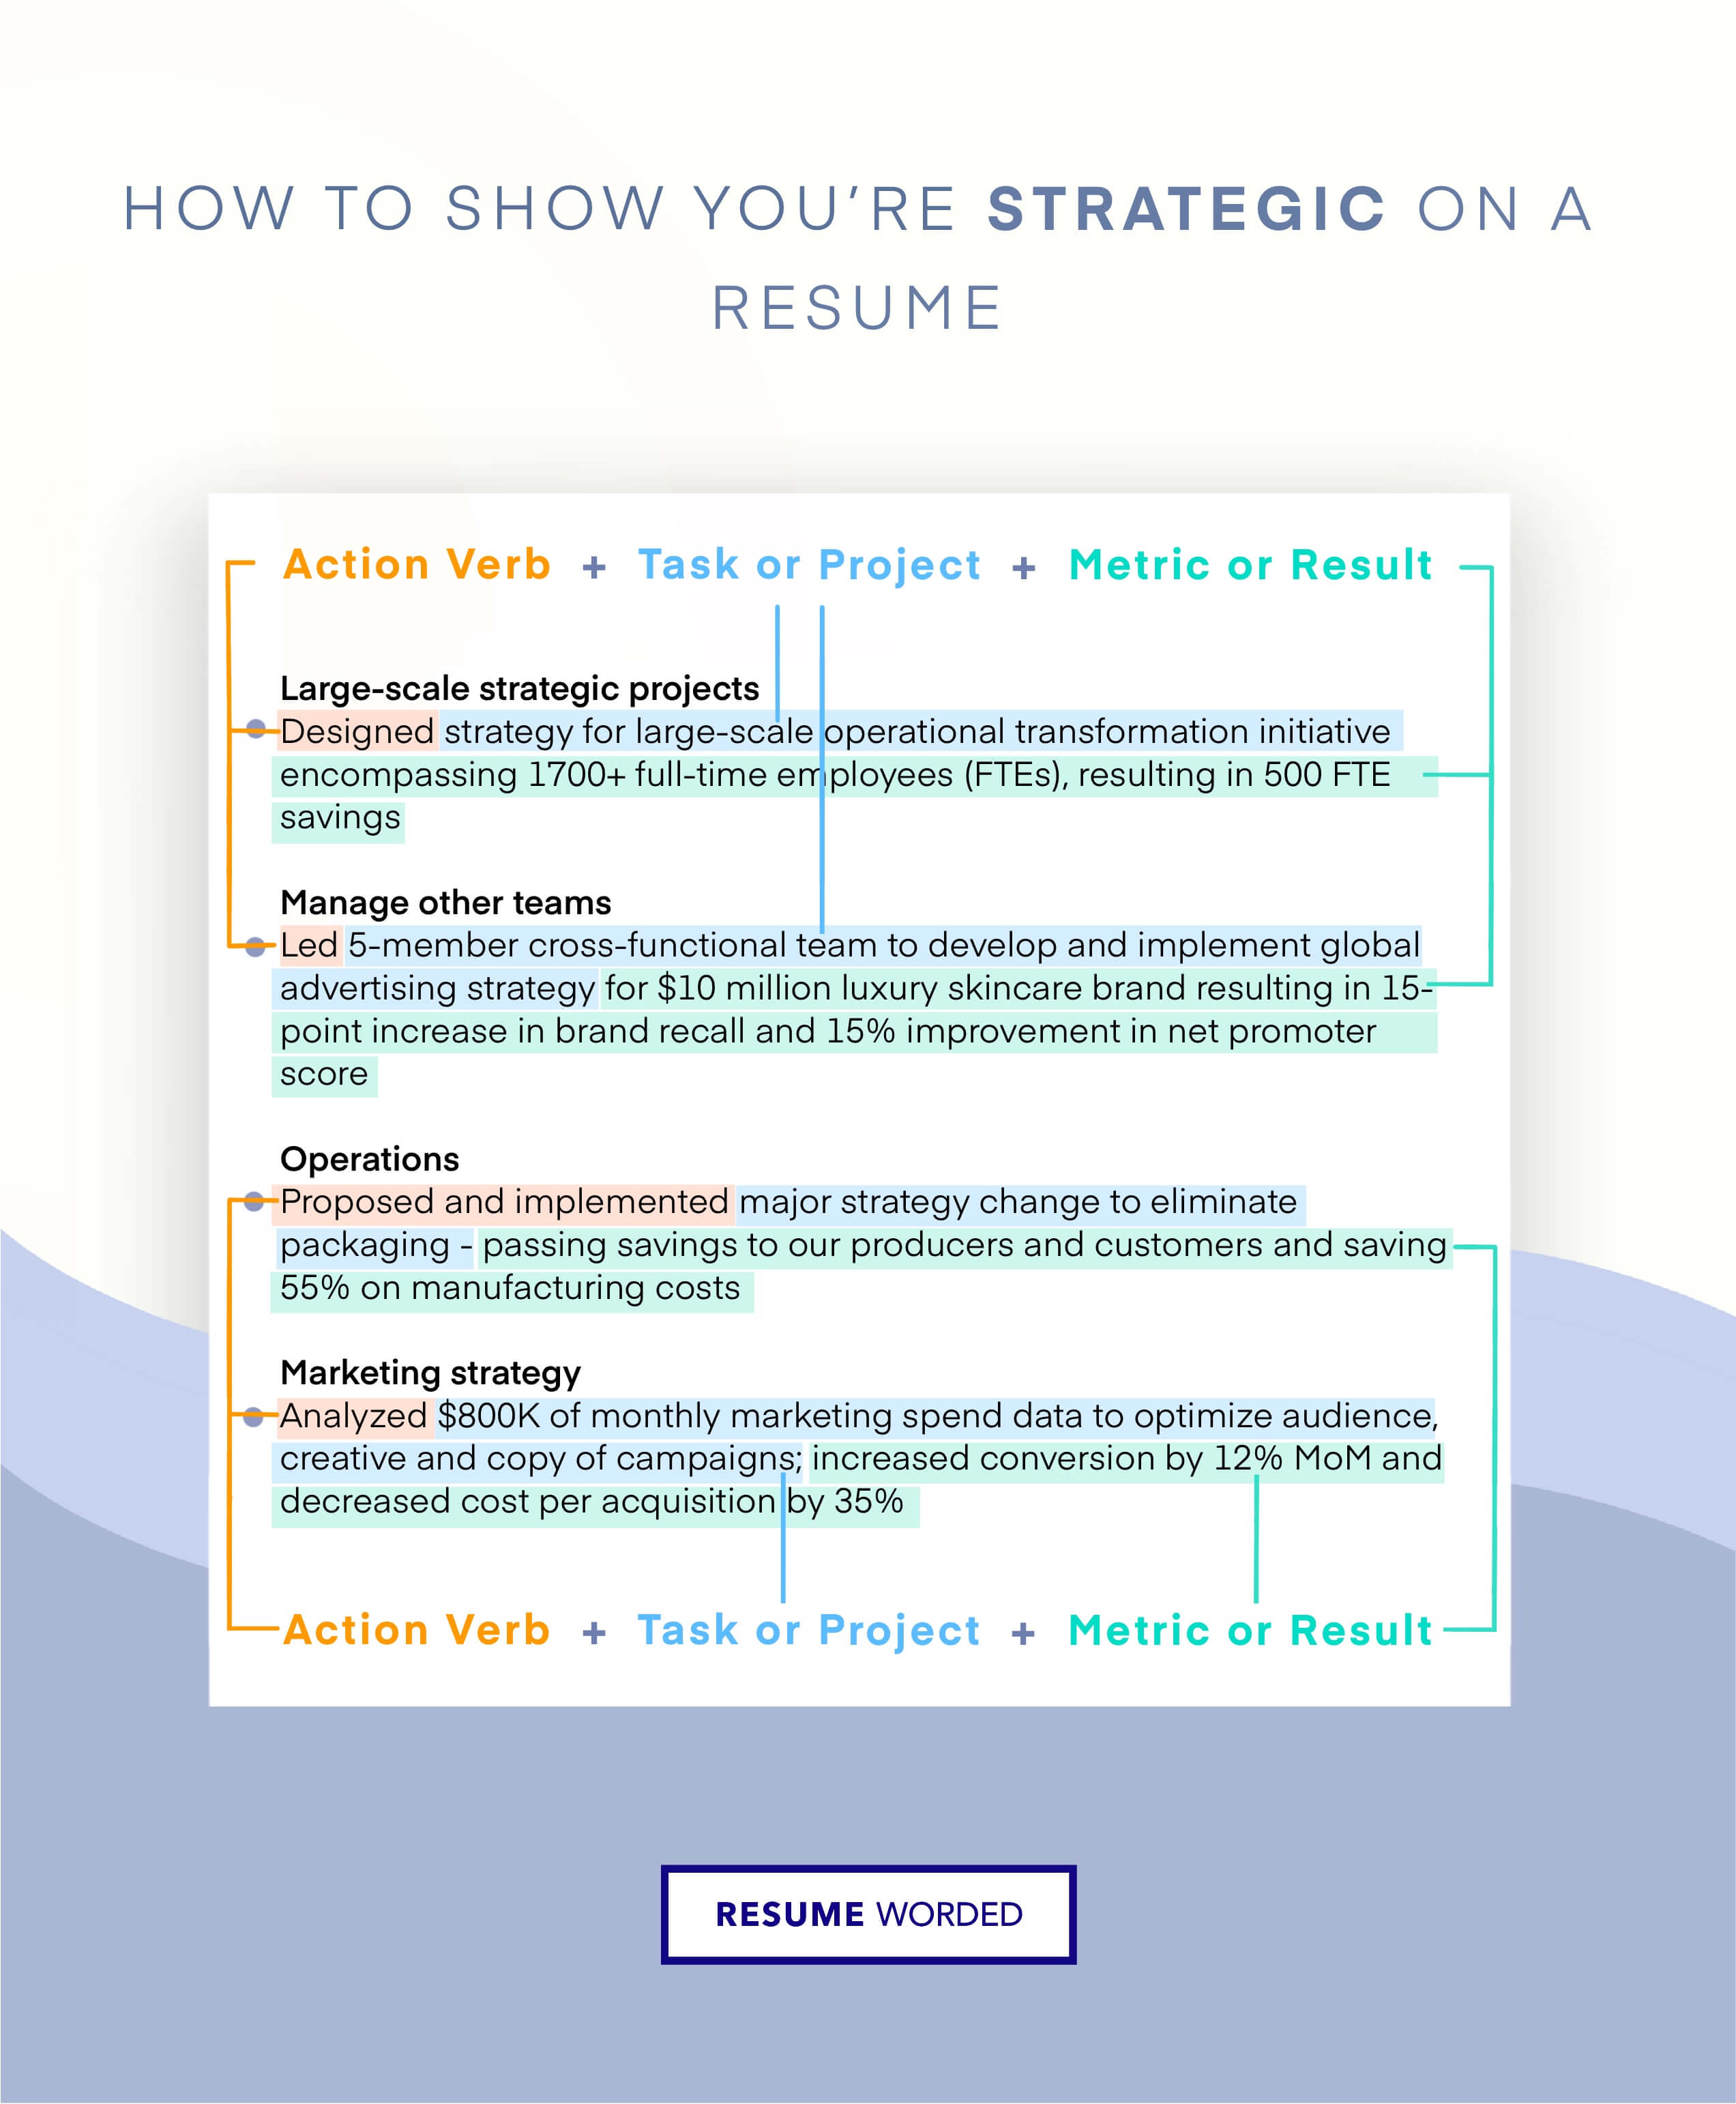 Highlight your talent acquisition strategies - Talent Acquisition Specialist CV